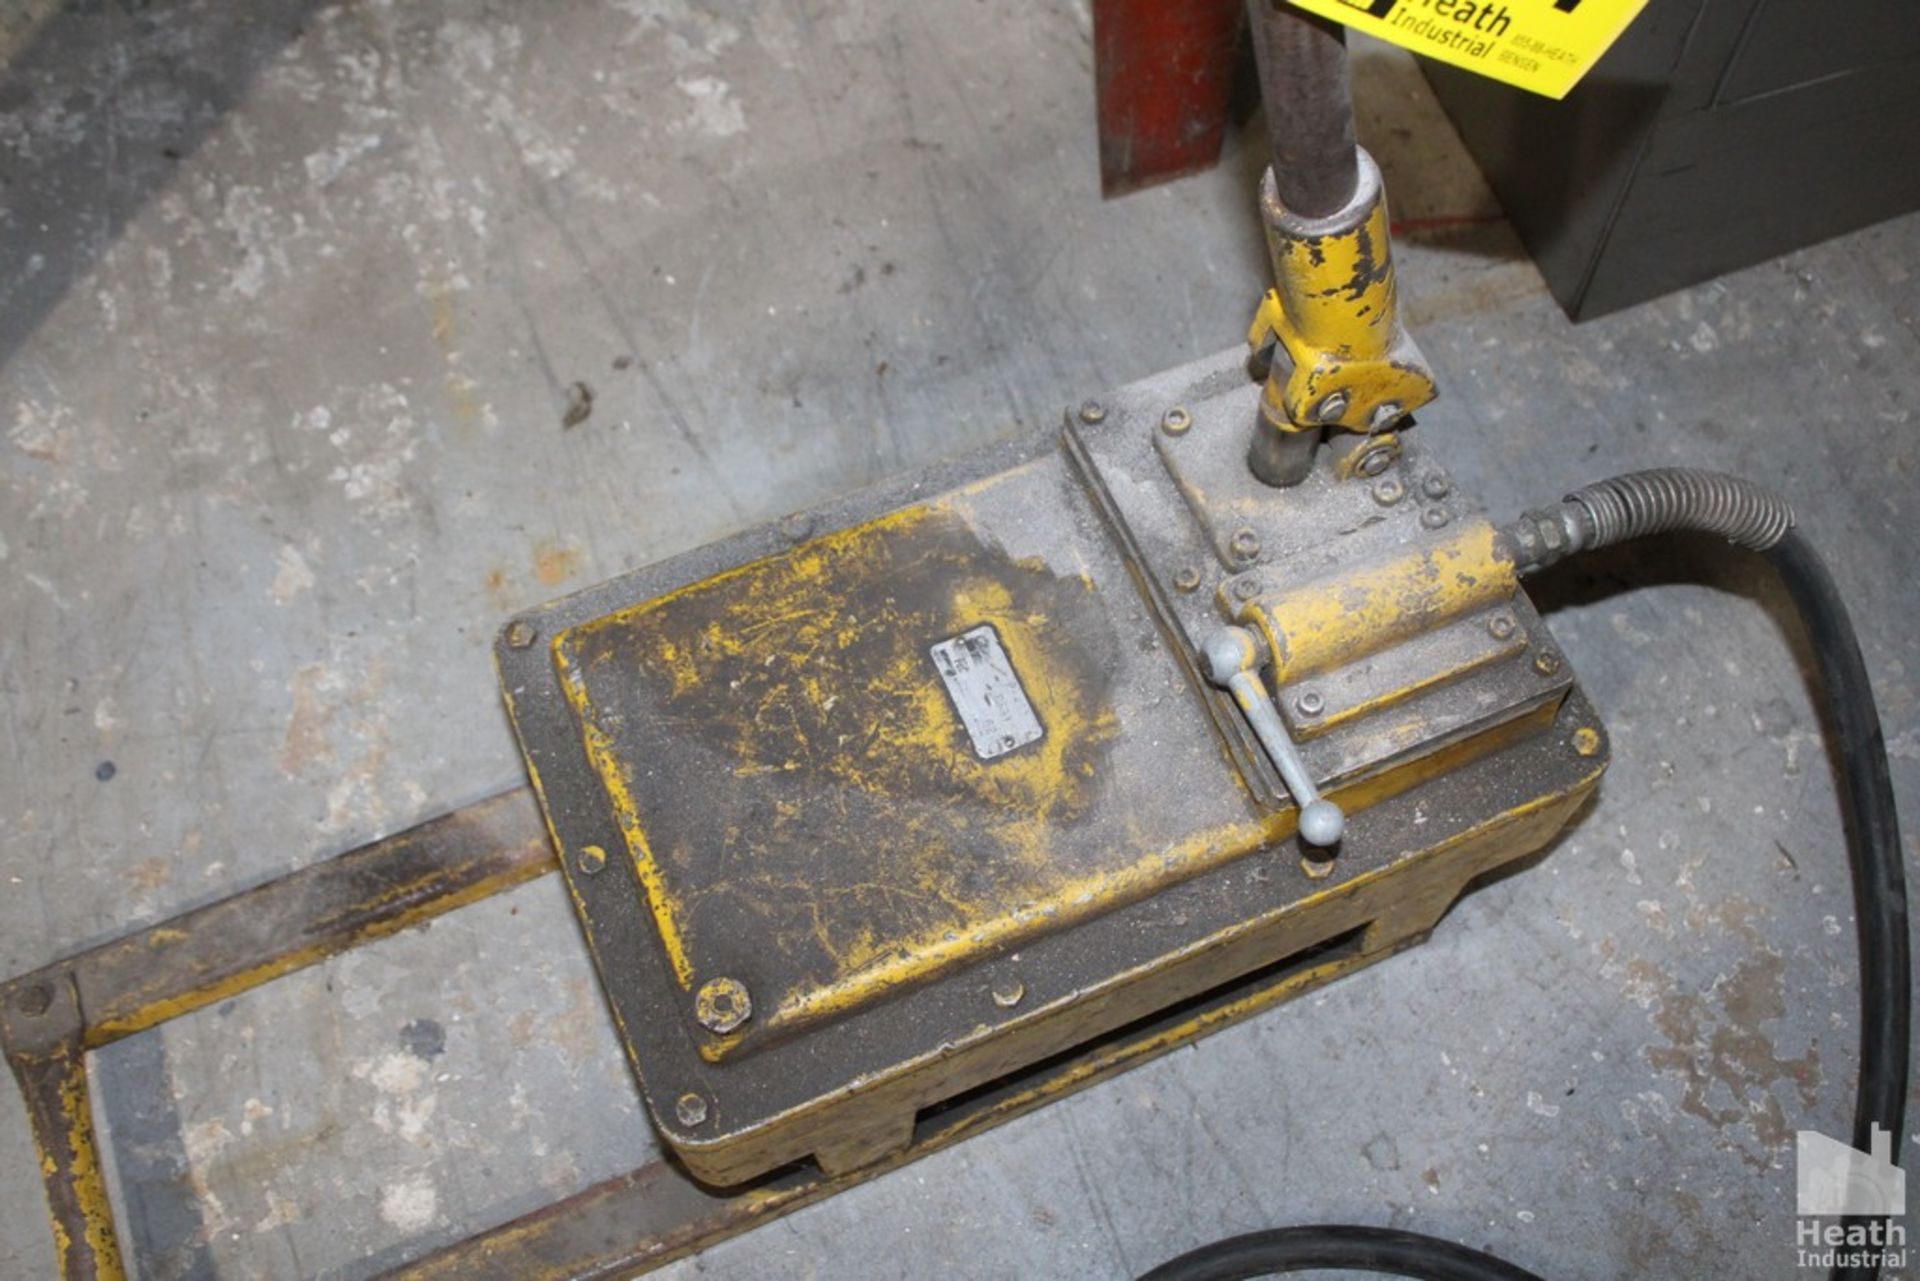 ENERPAC P426 HYDRAULIC POWER UNIT WITH HYDRAULIC JACK - Image 2 of 2